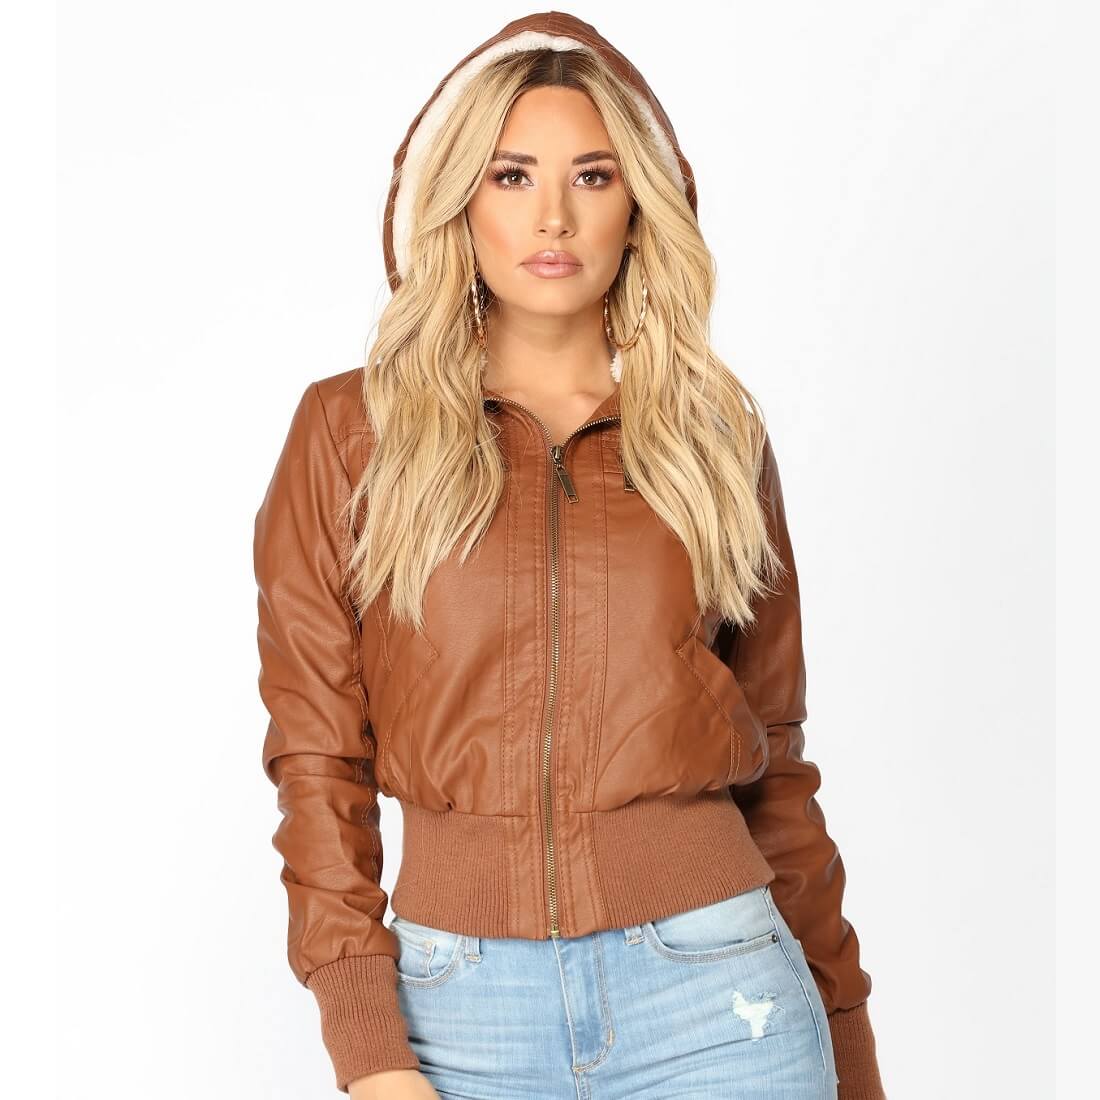 Jacket with Leather Sleeves - Pammvi Inc